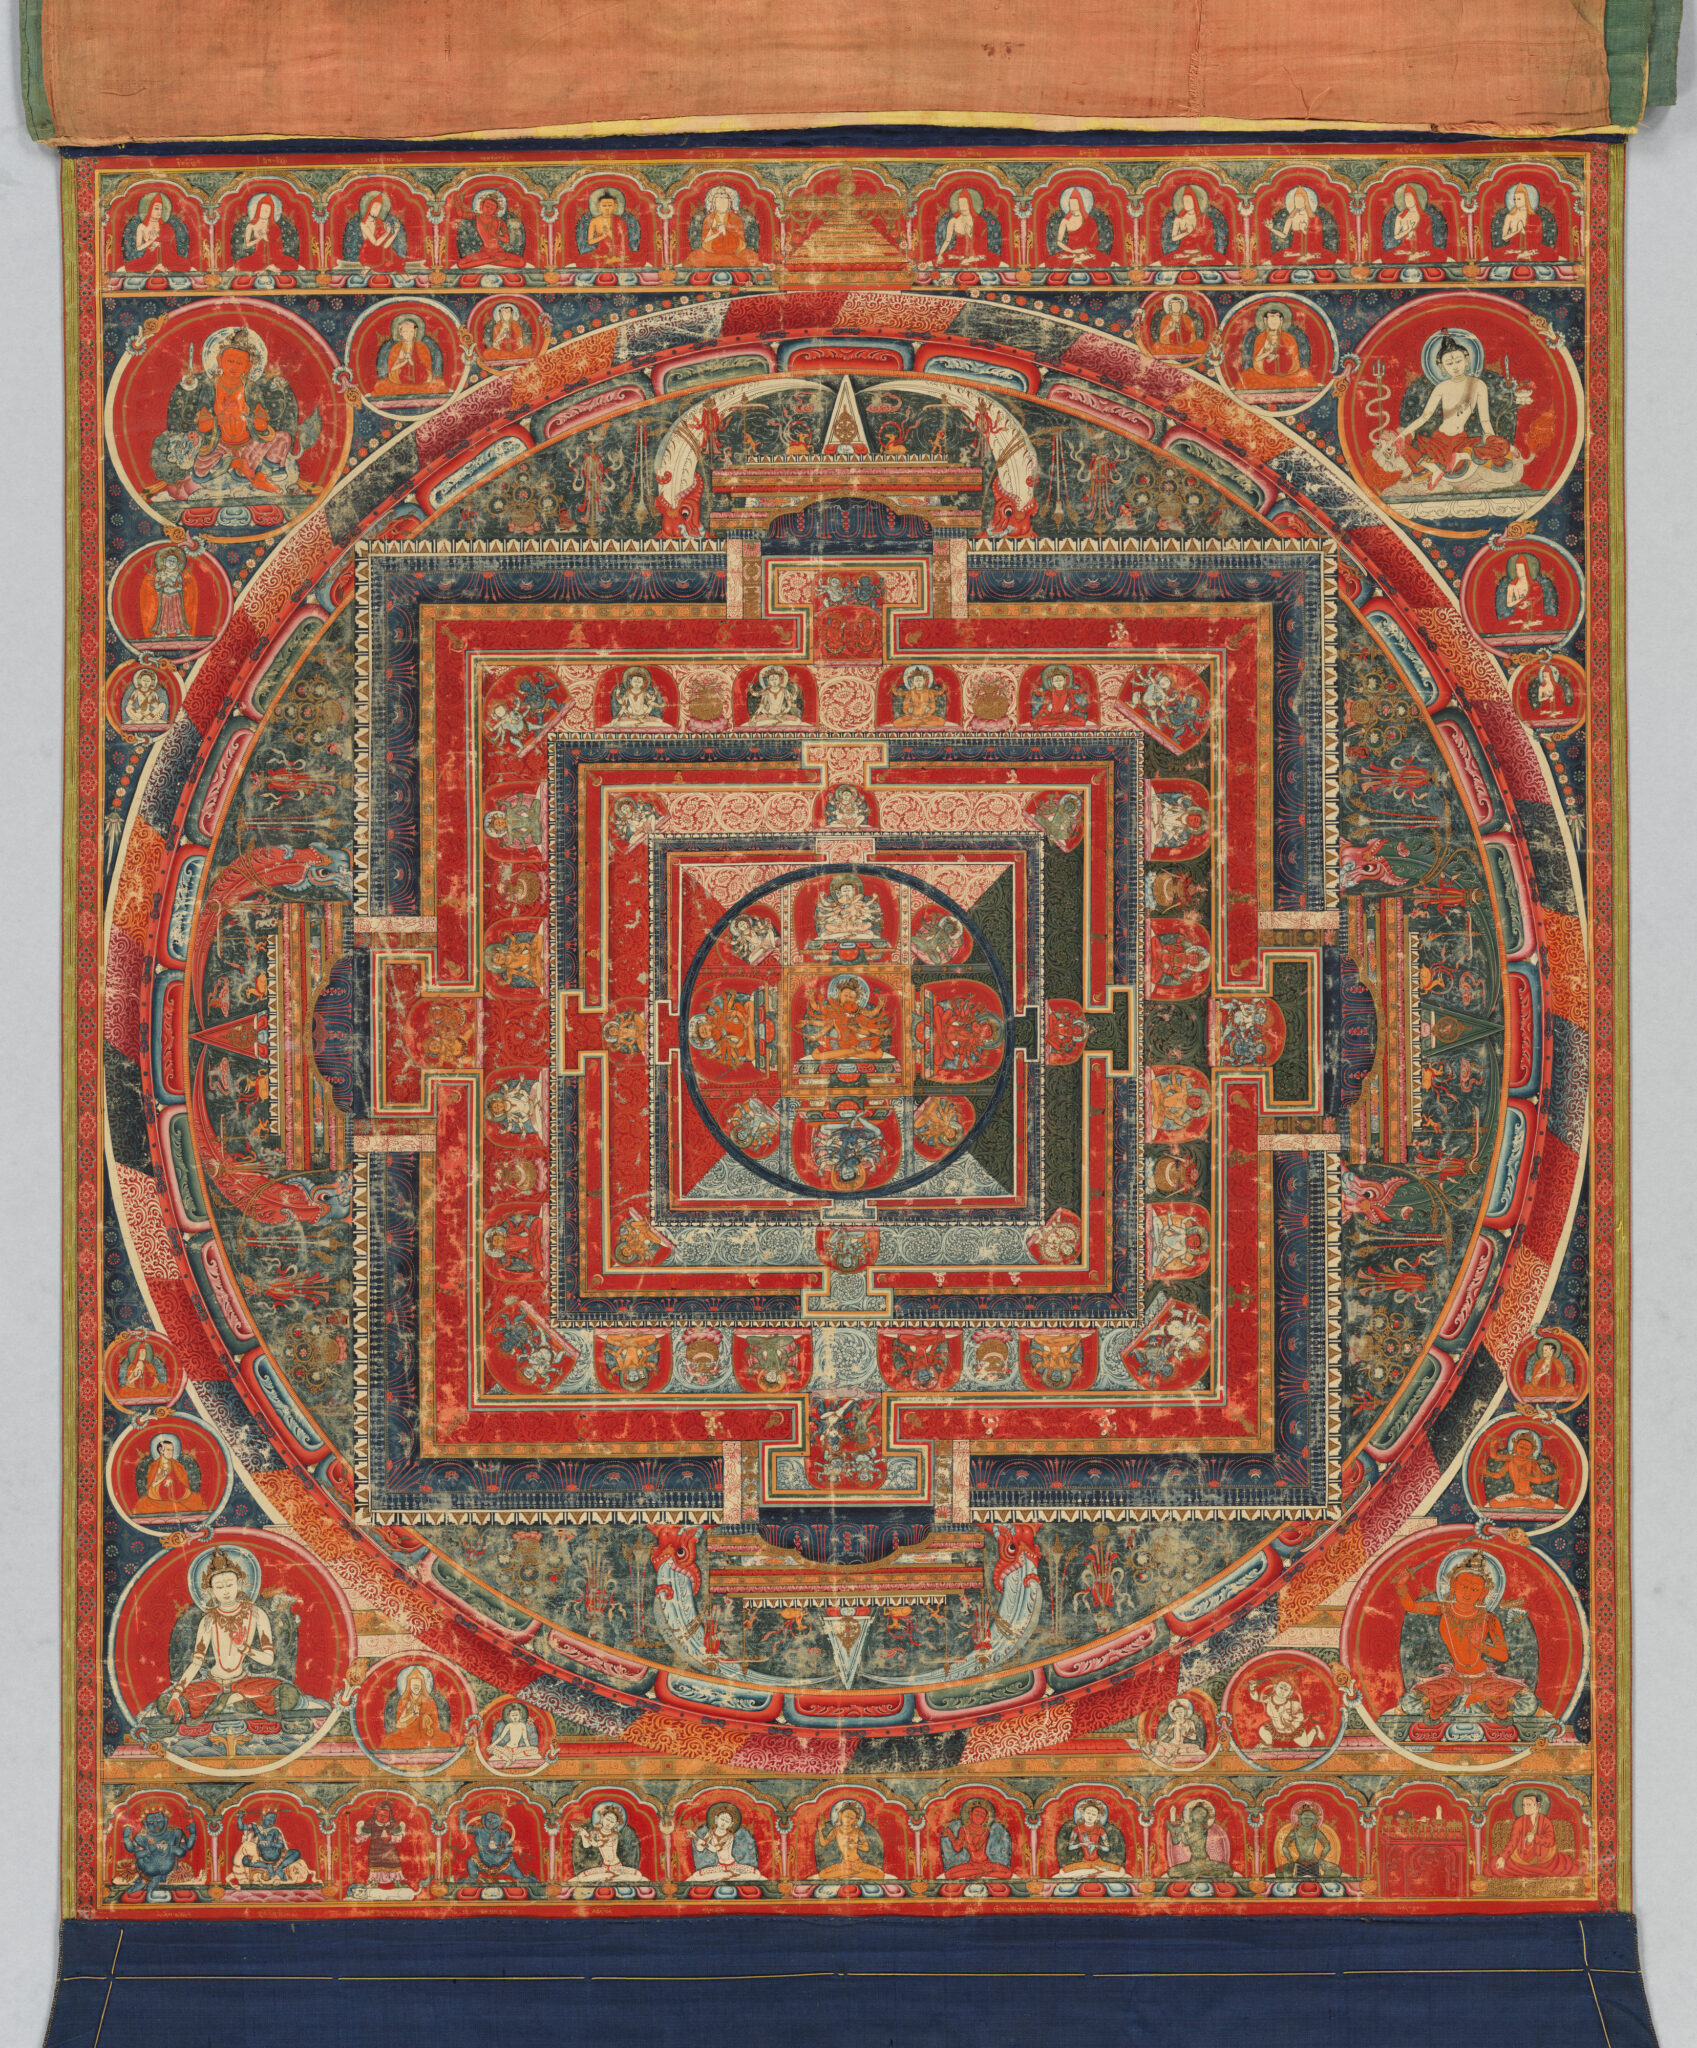 Close view of densely figurated mandala in predominantly red, blue, and green tones